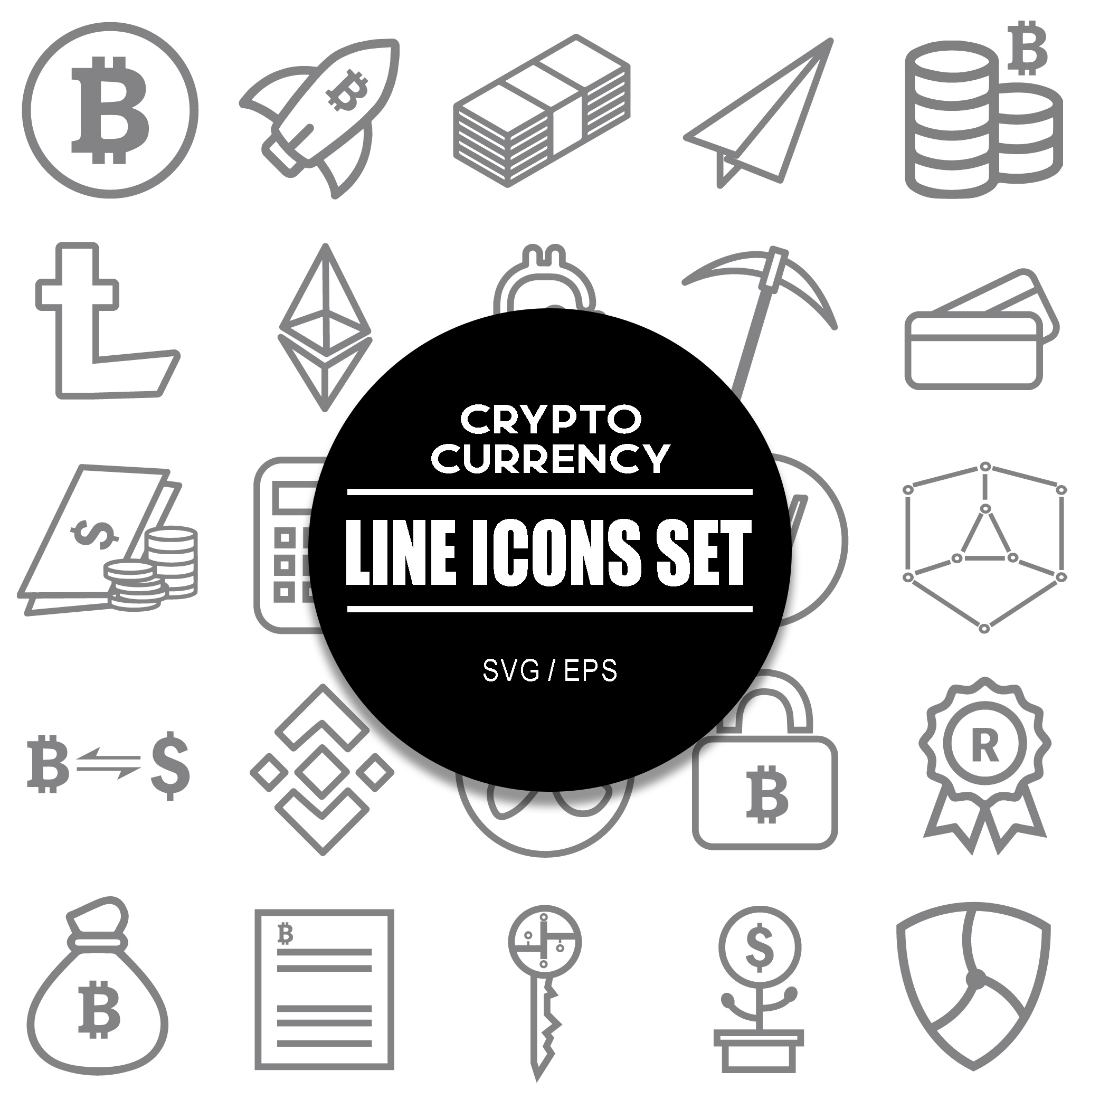 Crypto Currency Icon Set cover image.